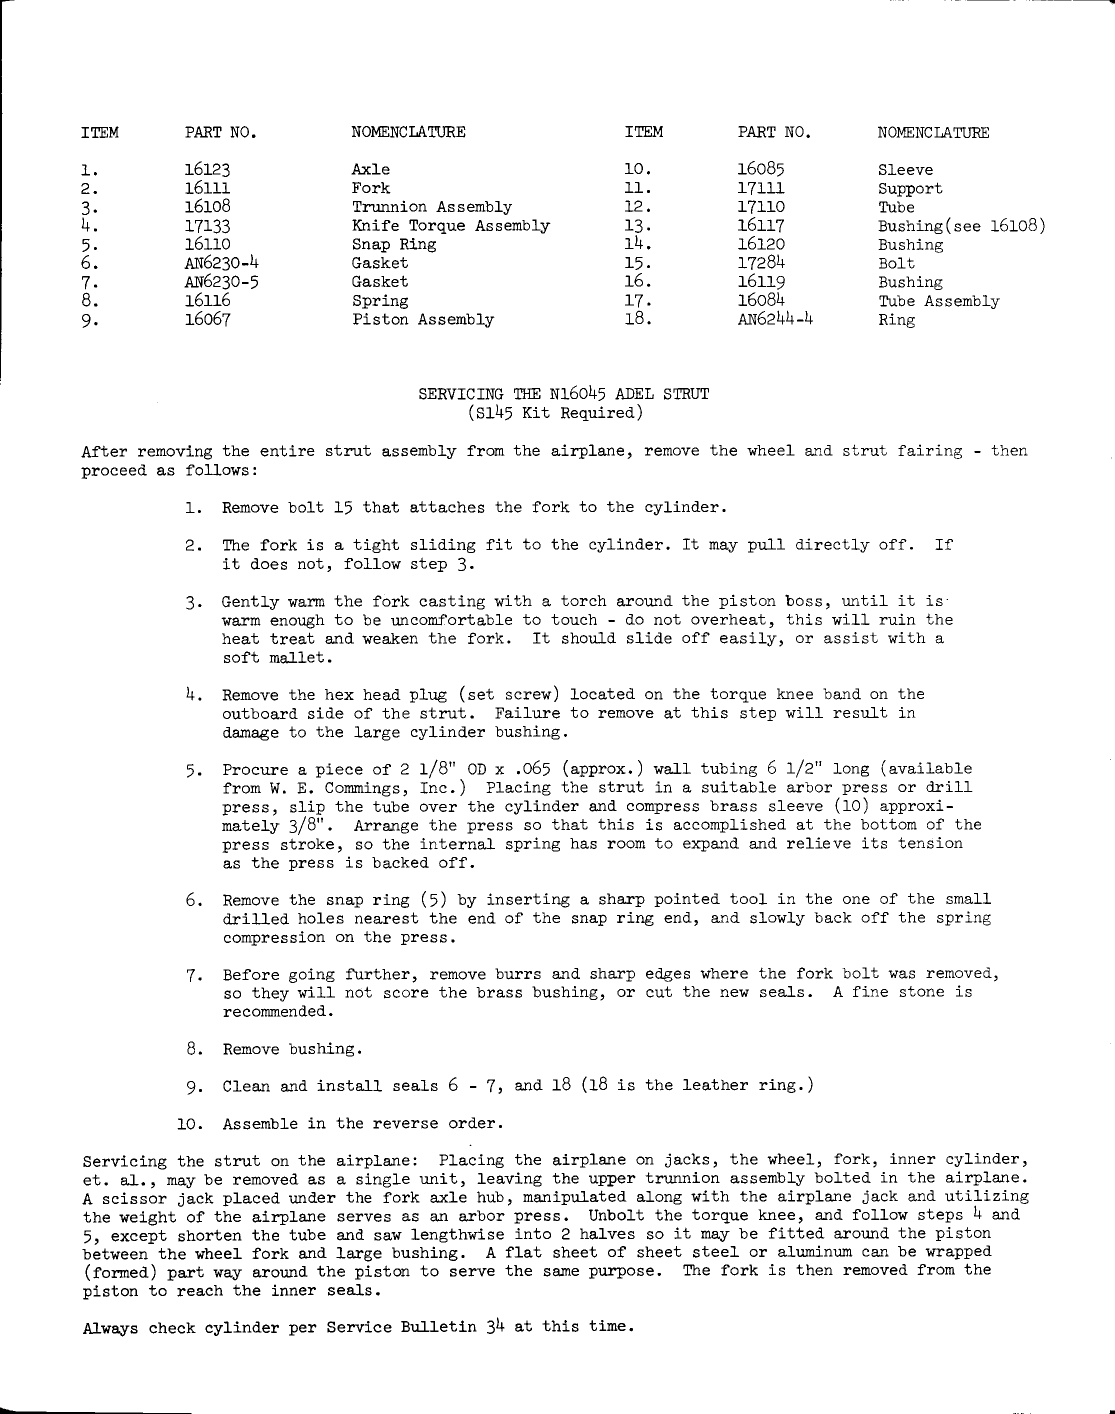 Sample page 7 from AirCorps Library document: The Swift Hydraulic Manual